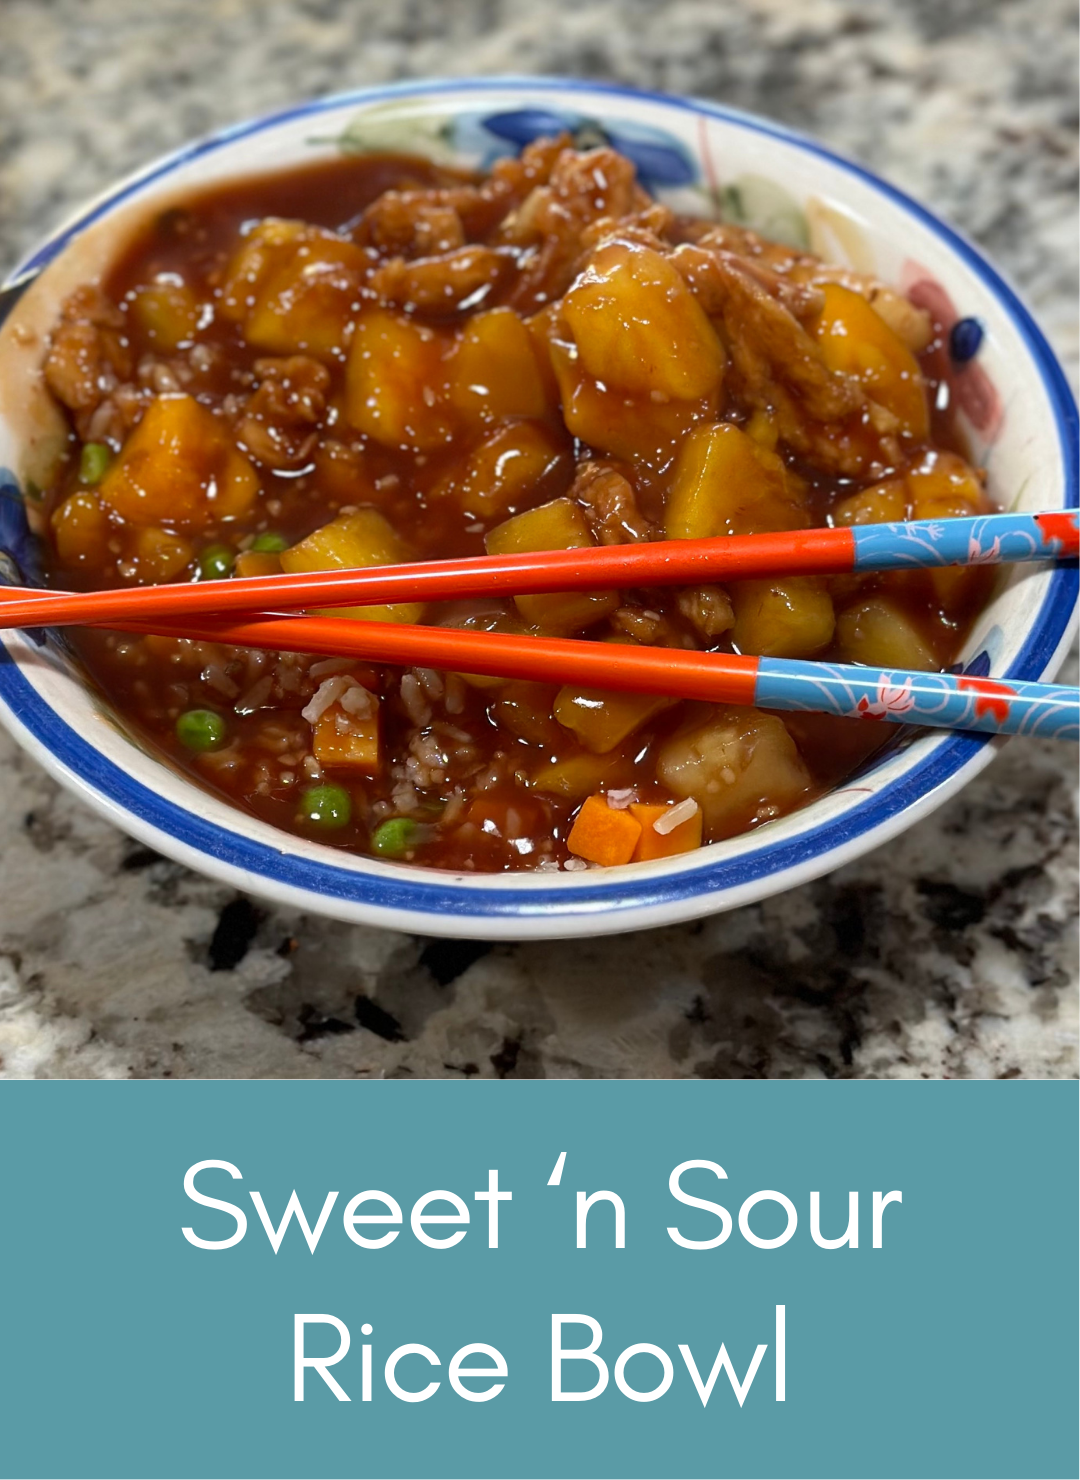 Whole food plant based Sweet 'n Sour vegan rice bowl Picture with link to recipe